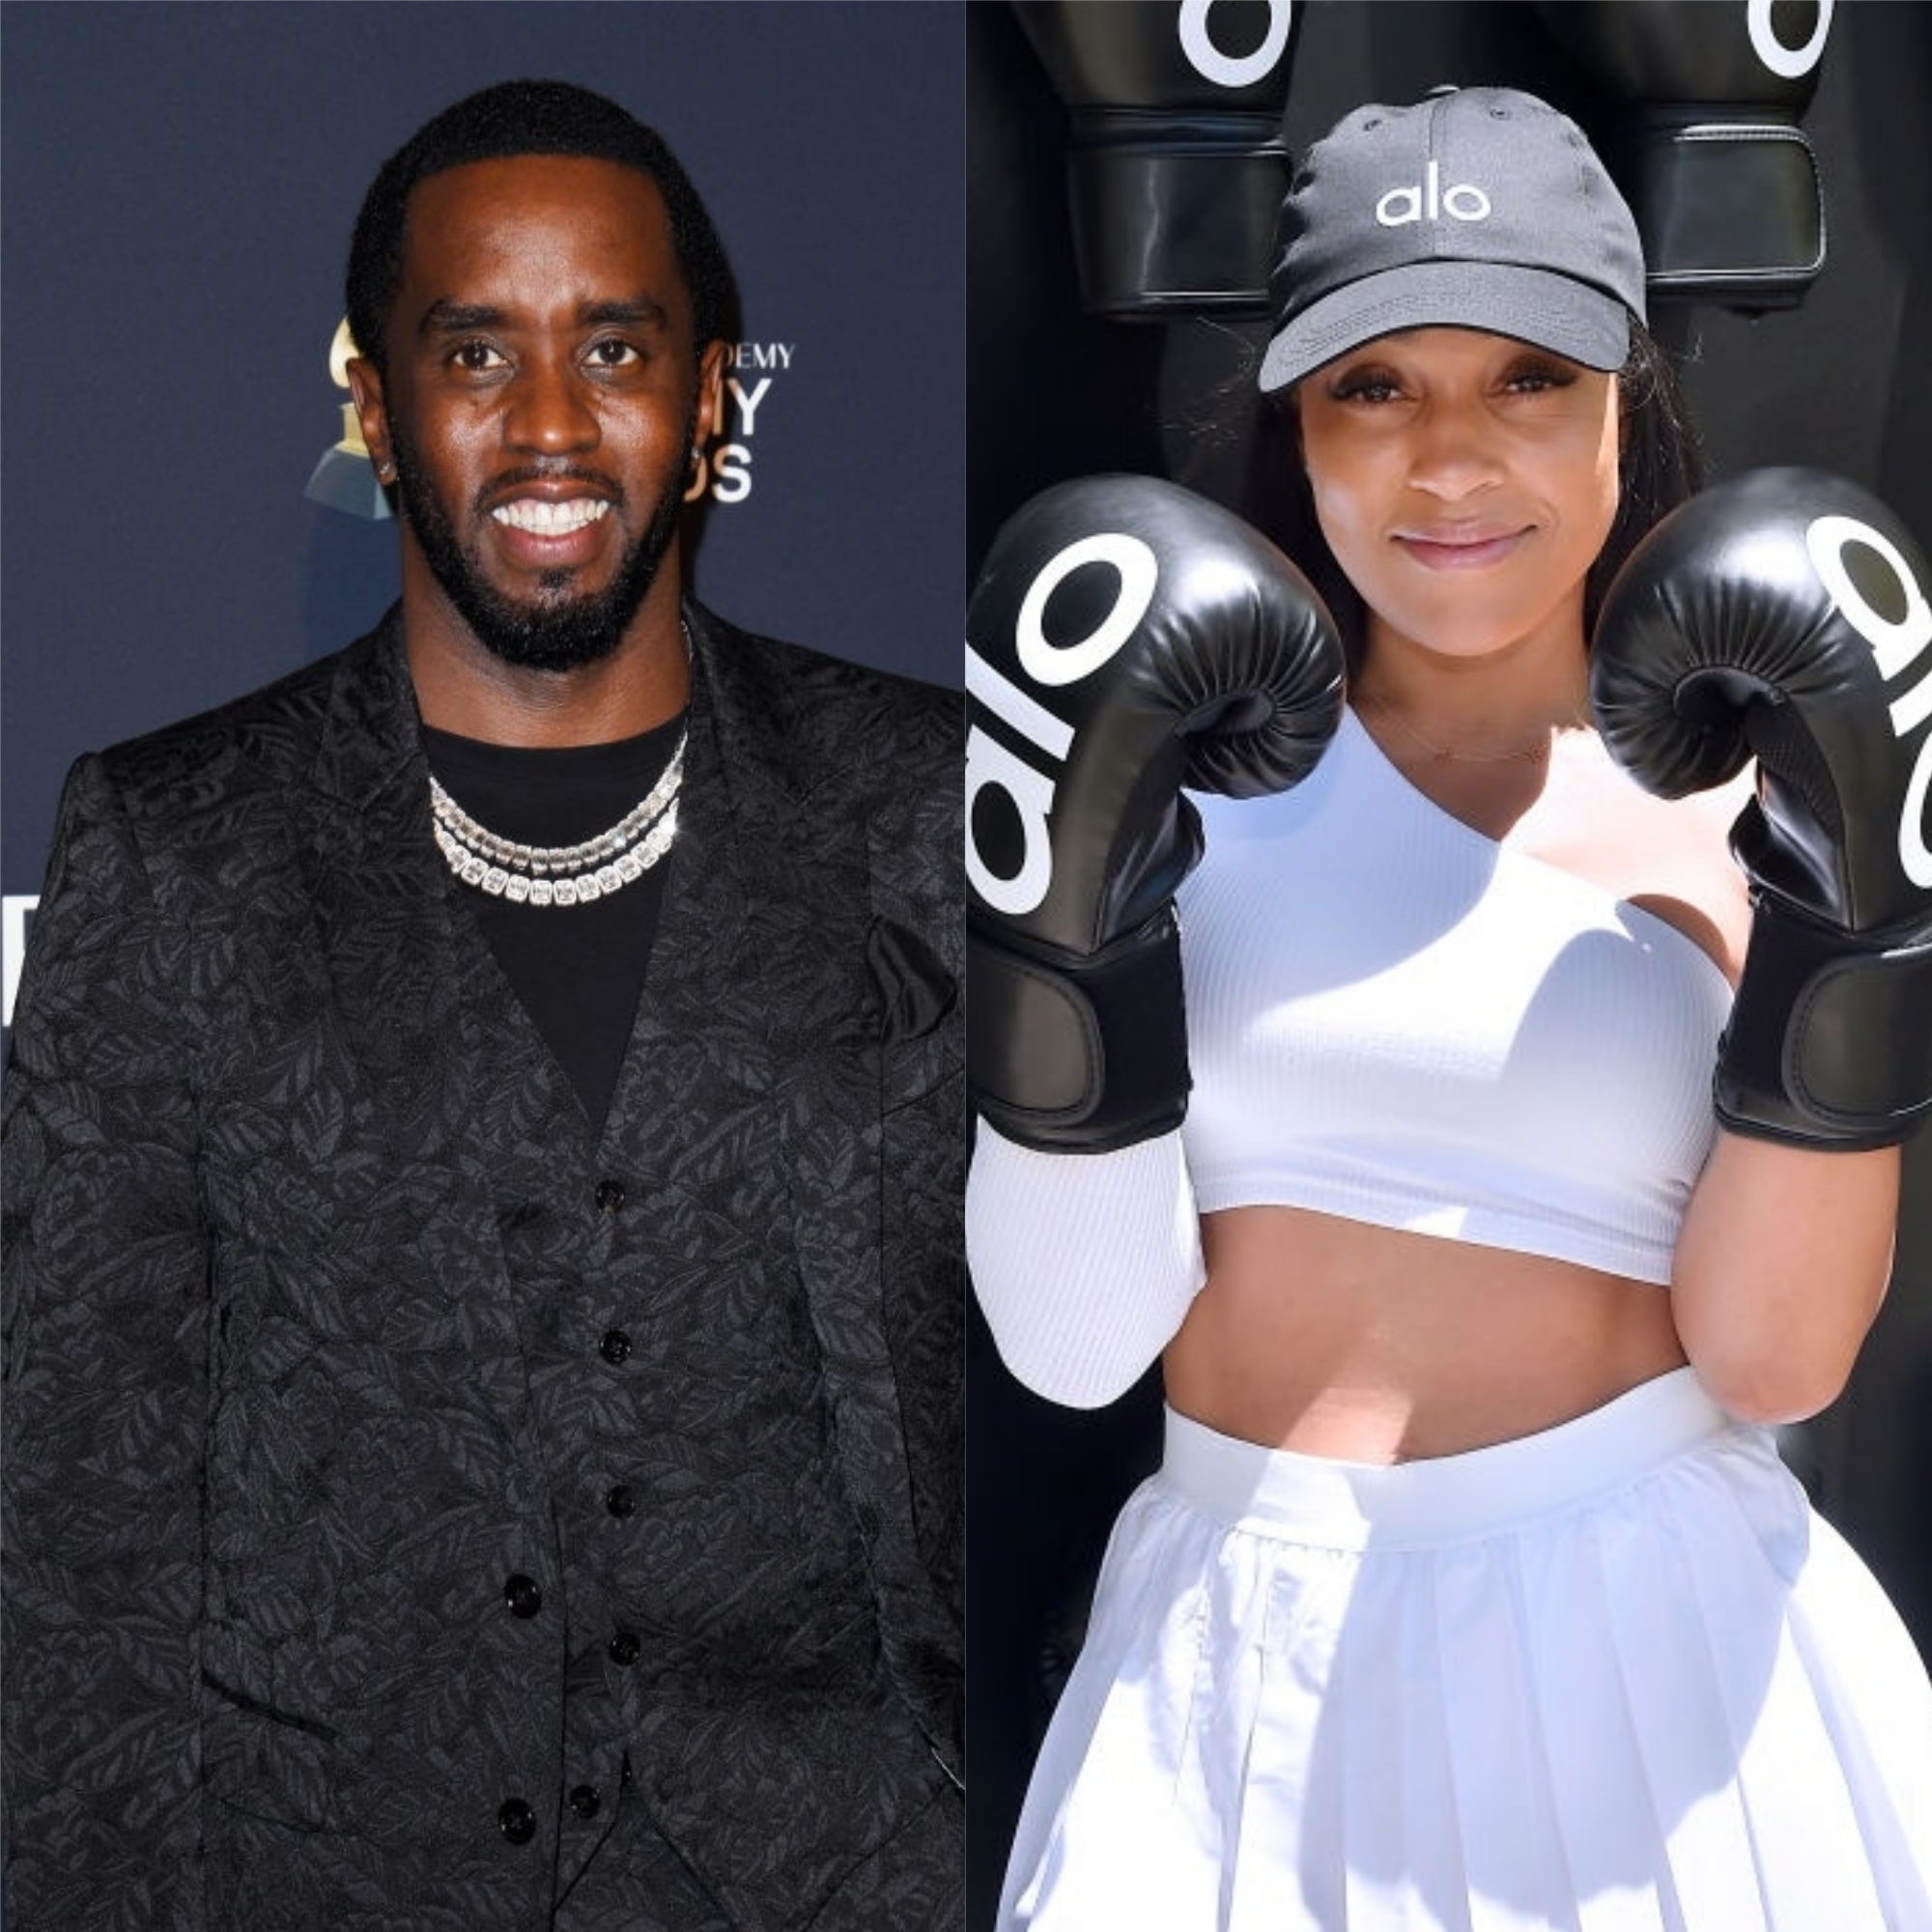 Twitter Reacts To Diddy & Joie Chavis’ Kiss With Jokes